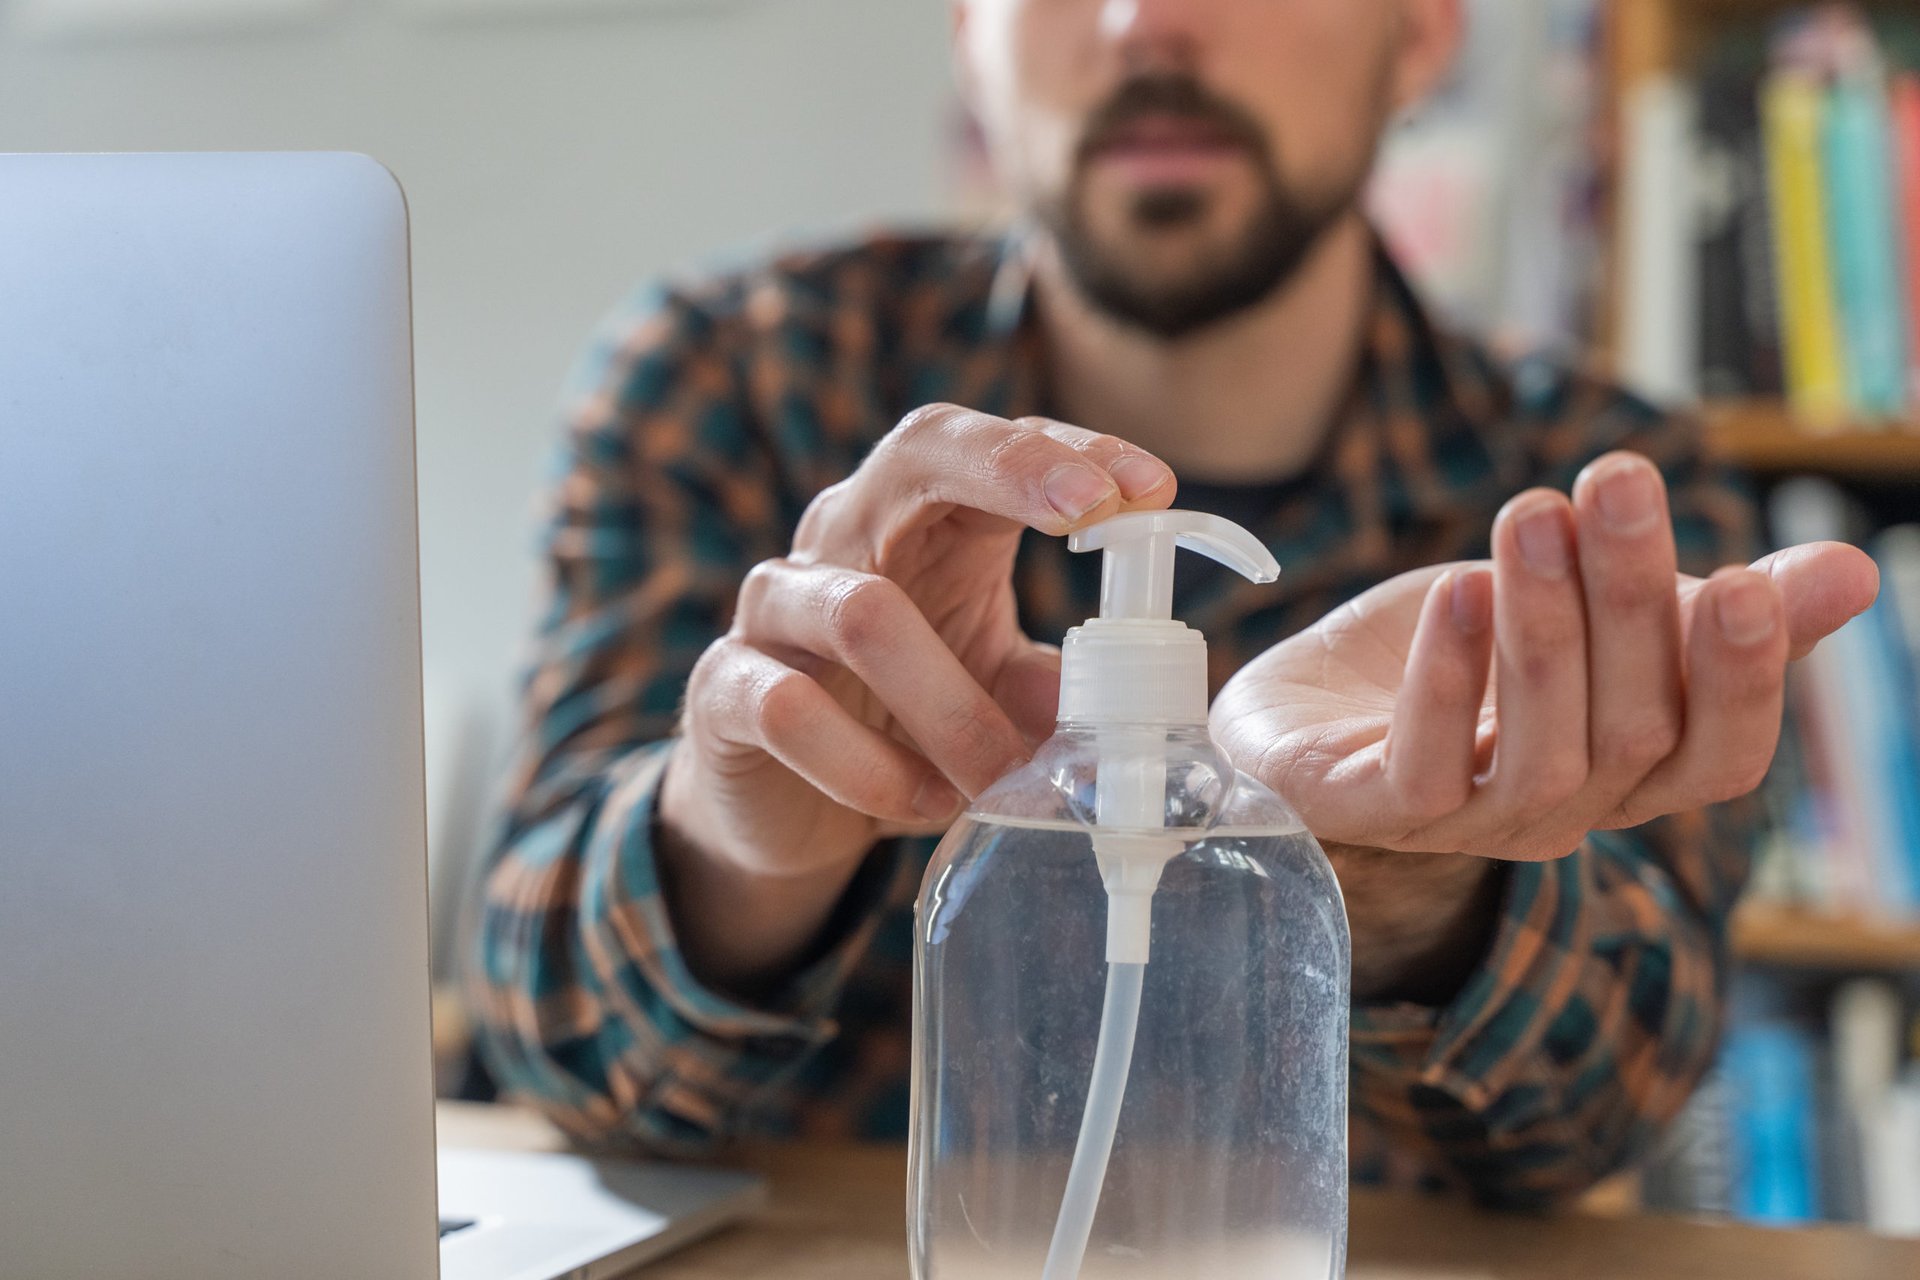 A man uses hand sanitizer while working from home due to the coronavirus pandemic